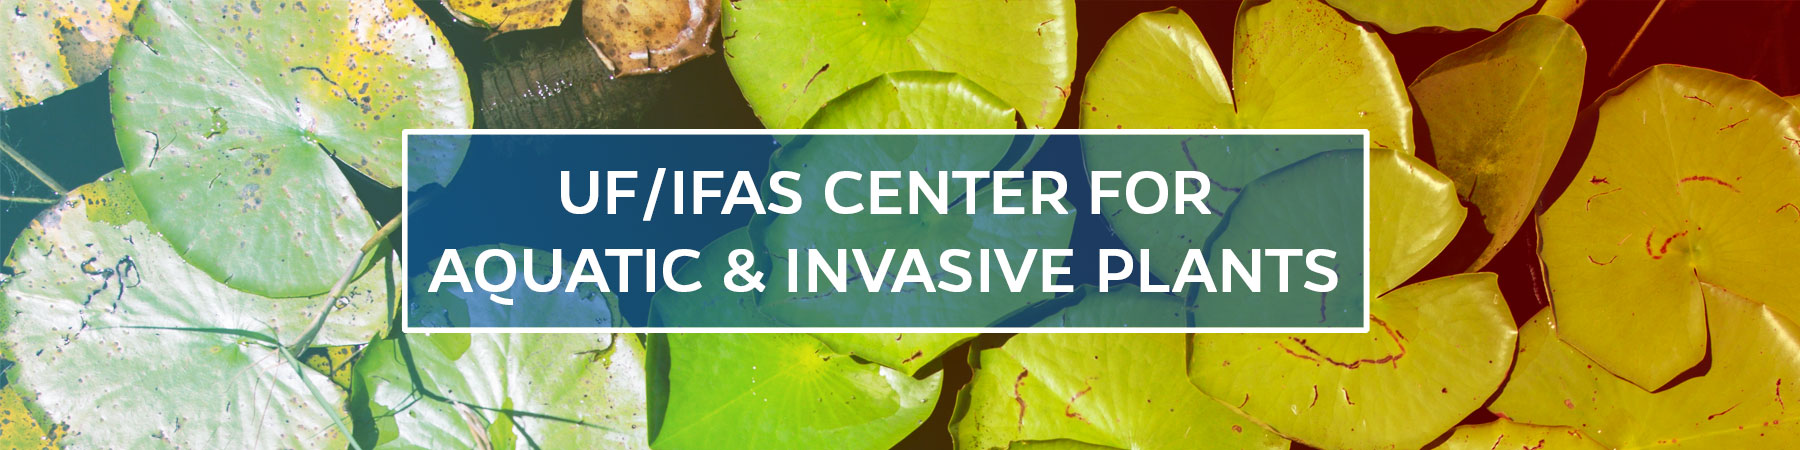 UF/IFAS Center for Aquatic and Invasive Plants